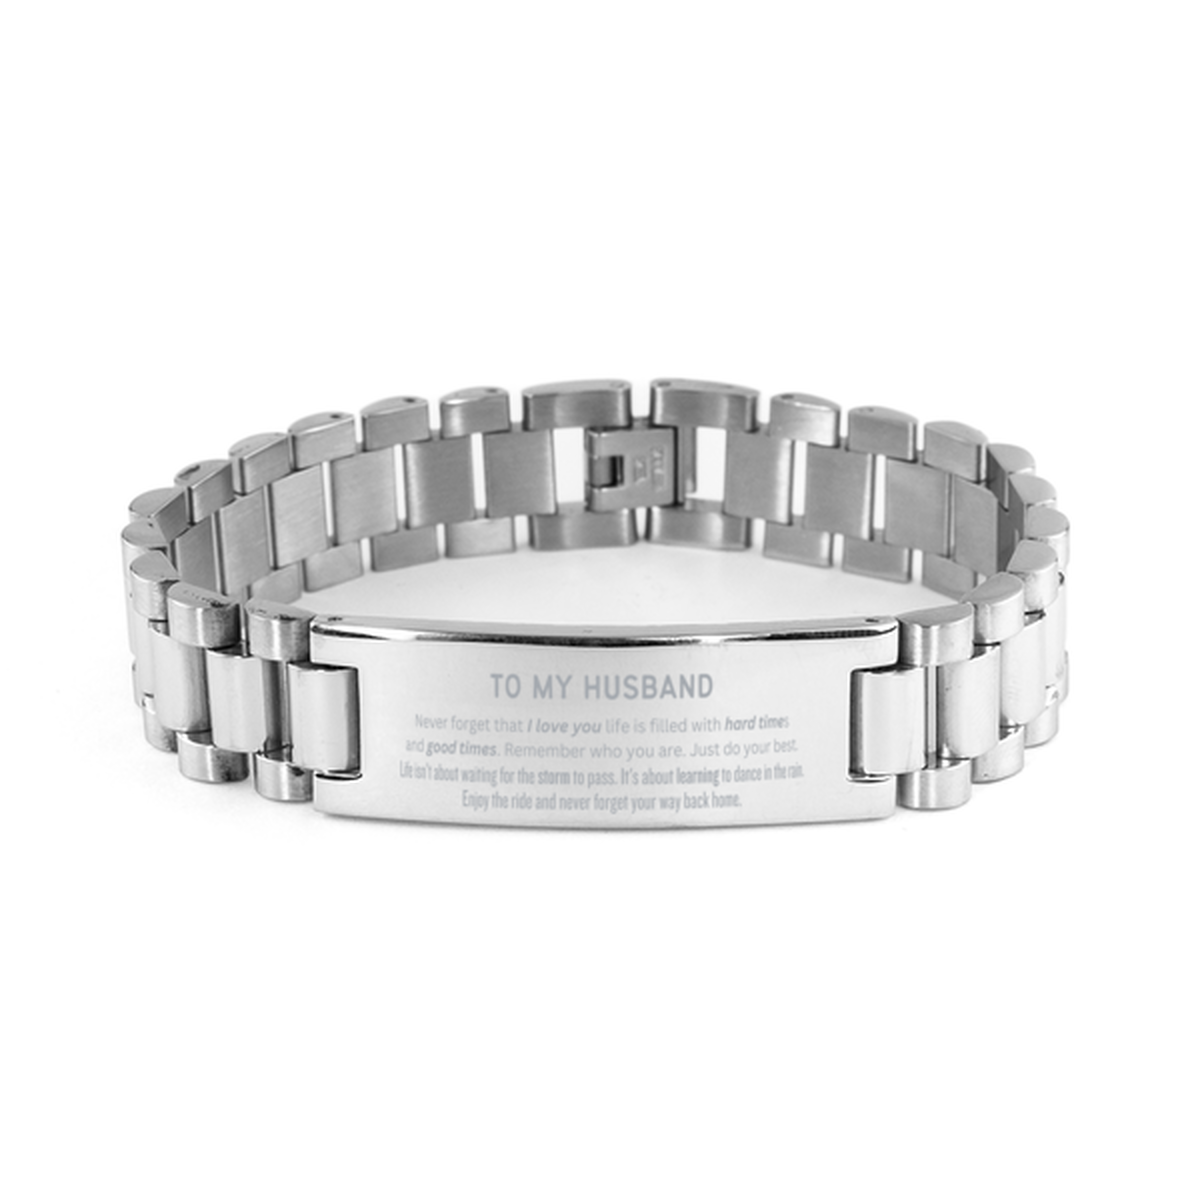 Christmas Husband Ladder Stainless Steel Bracelet Gifts, To My Husband Birthday Thank You Gifts For Husband, Graduation Unique Gifts For Husband To My Husband Never forget that I love you life is filled with hard times and good times. Remember who you are